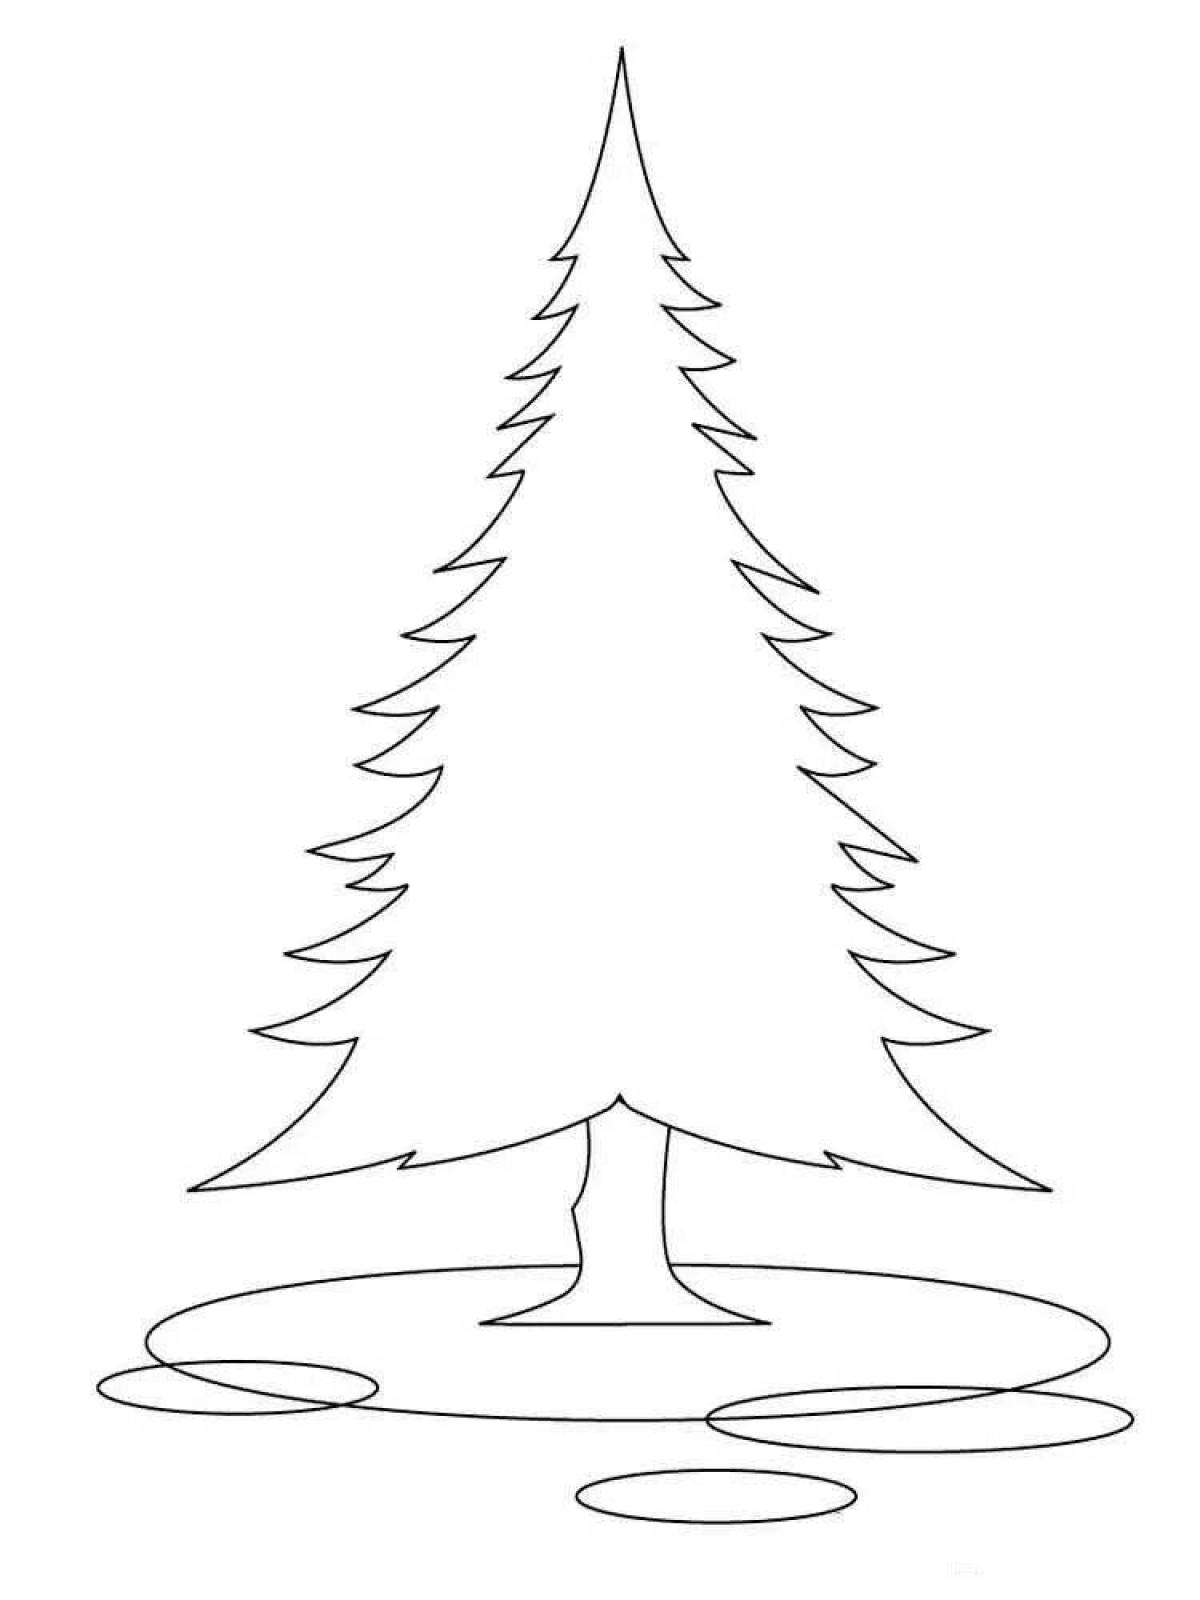 Adorable Christmas Tree Coloring Page for Toddlers